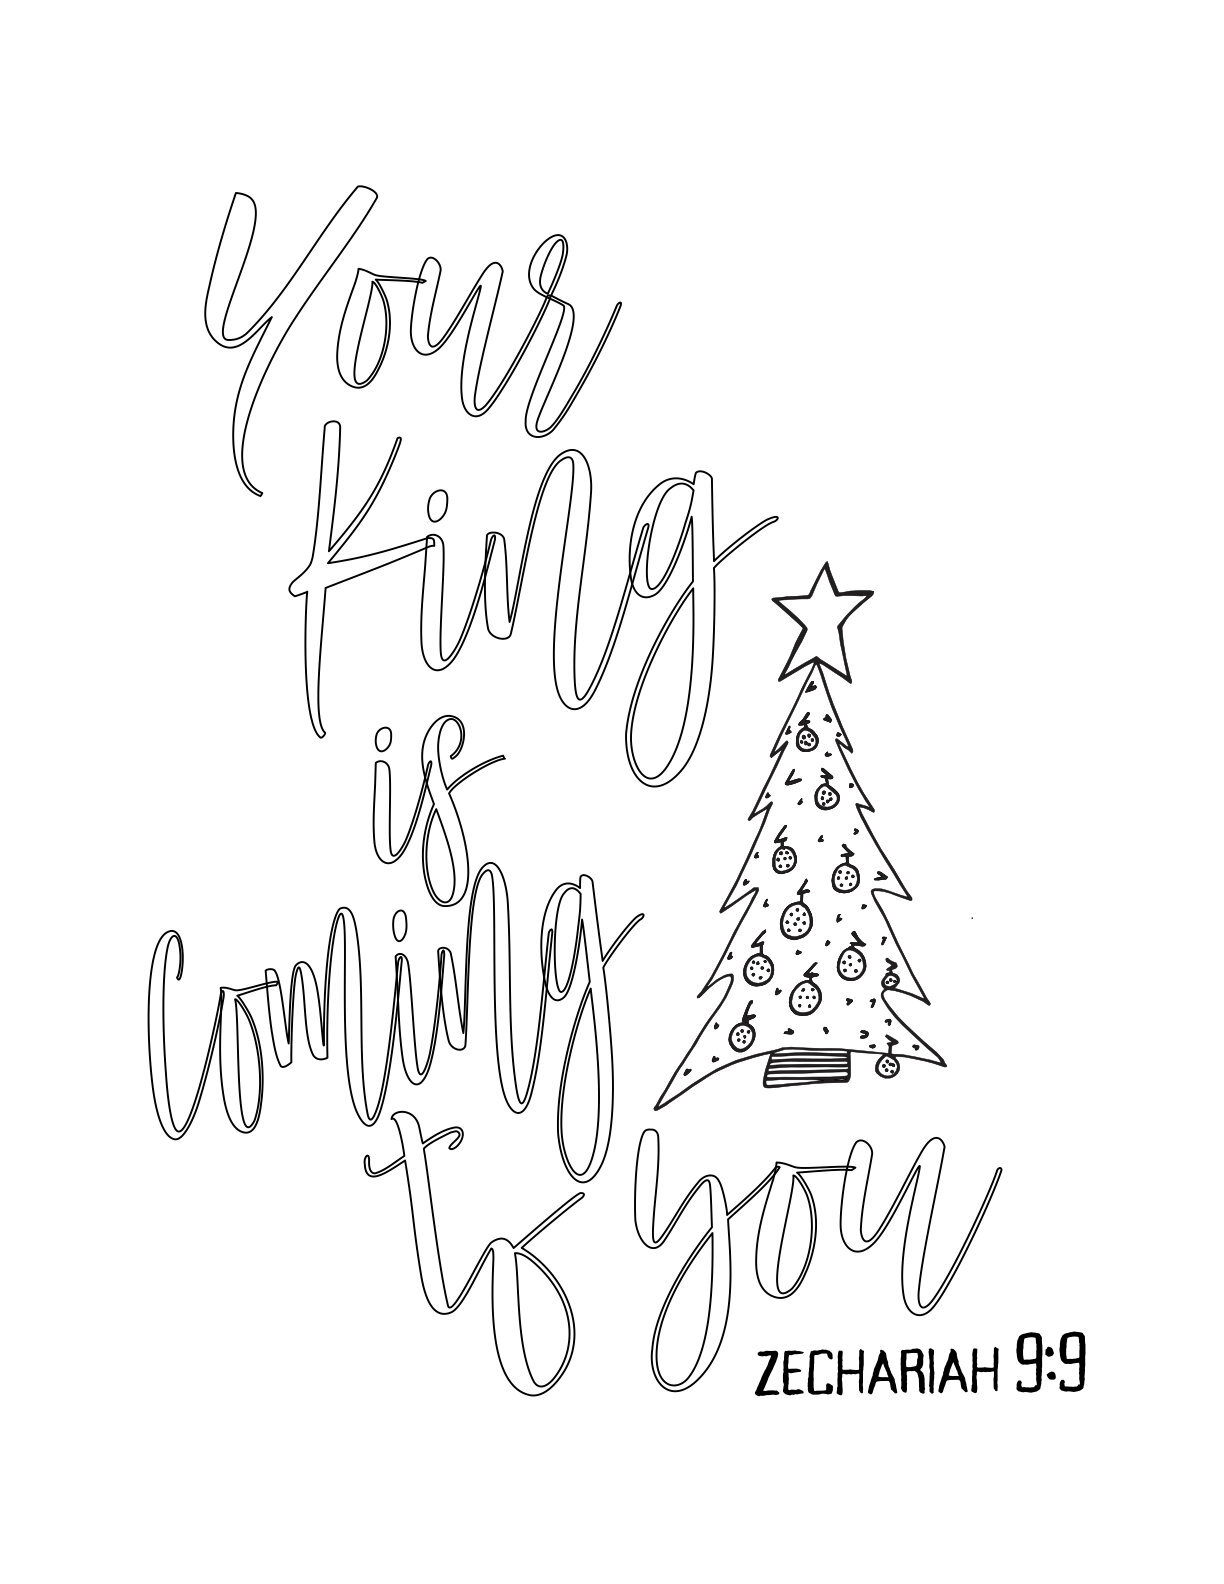 Free Advent Coloring Page - Your King is Coming to You - Zechariah 9:9 CLICK HERE TO DOWNLOAD THIS FREE CHRISTMAS COLORING PAGE